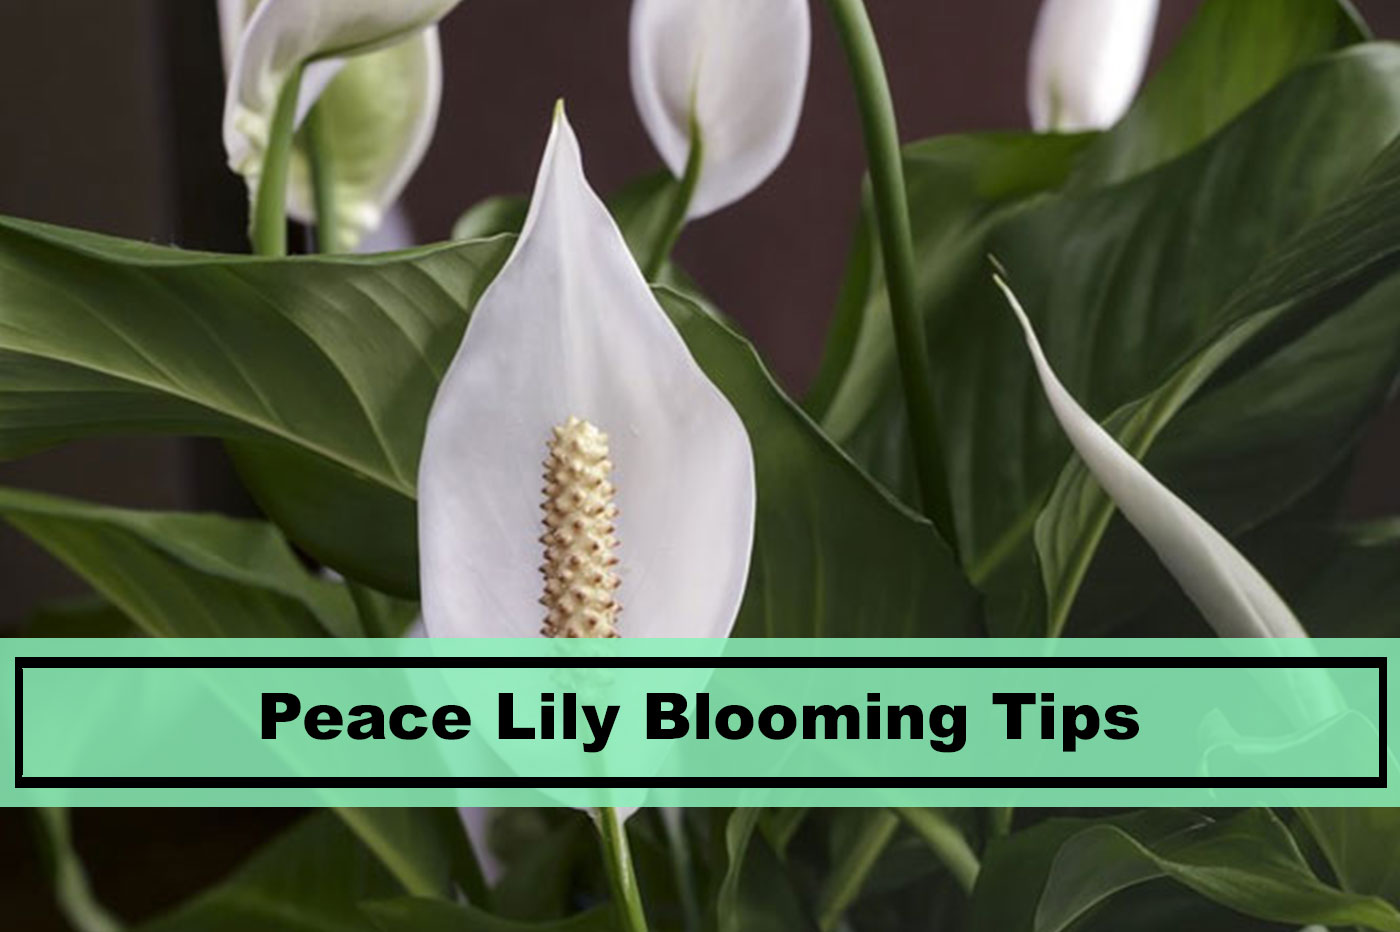 4. Lilies Prefer Full Sun for Blooms